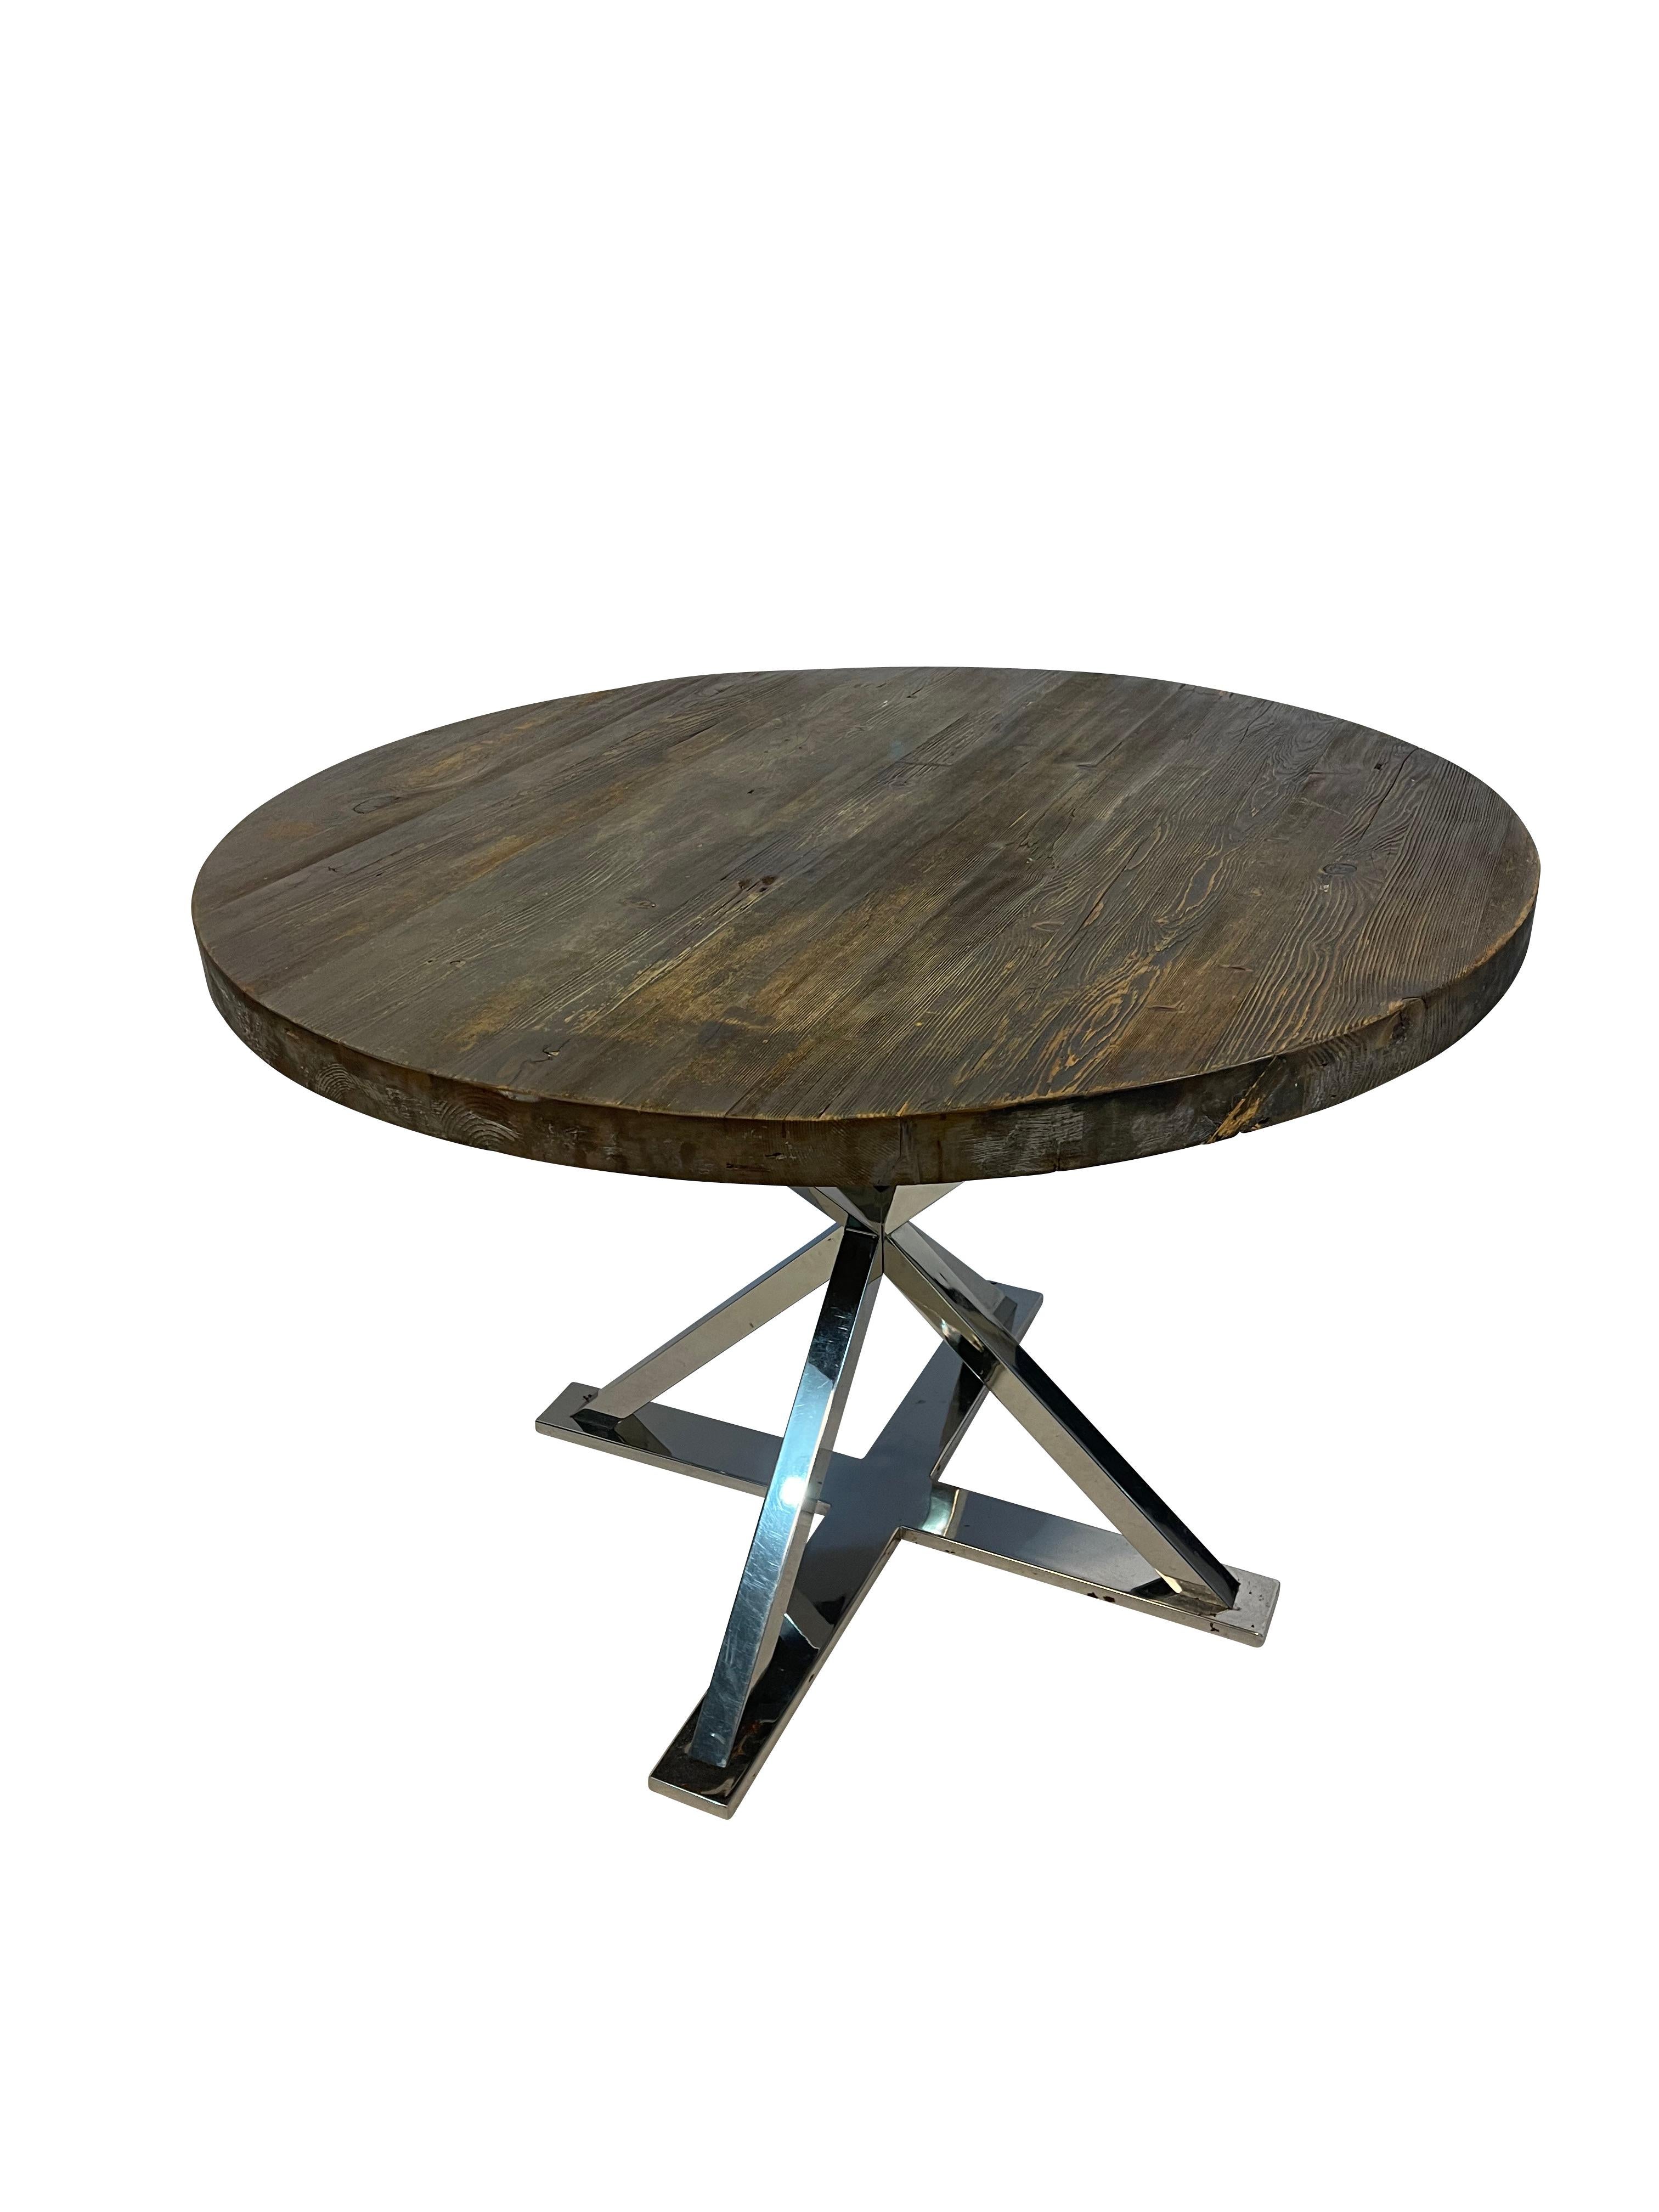 Rustic round farm table top with a modern chrome cross bar base.  The top appears to be reclaimed wood. A mix of the old and new,  Perfect in a modern or modern farmhouse setting as a kitchen, dining, or accent table. 